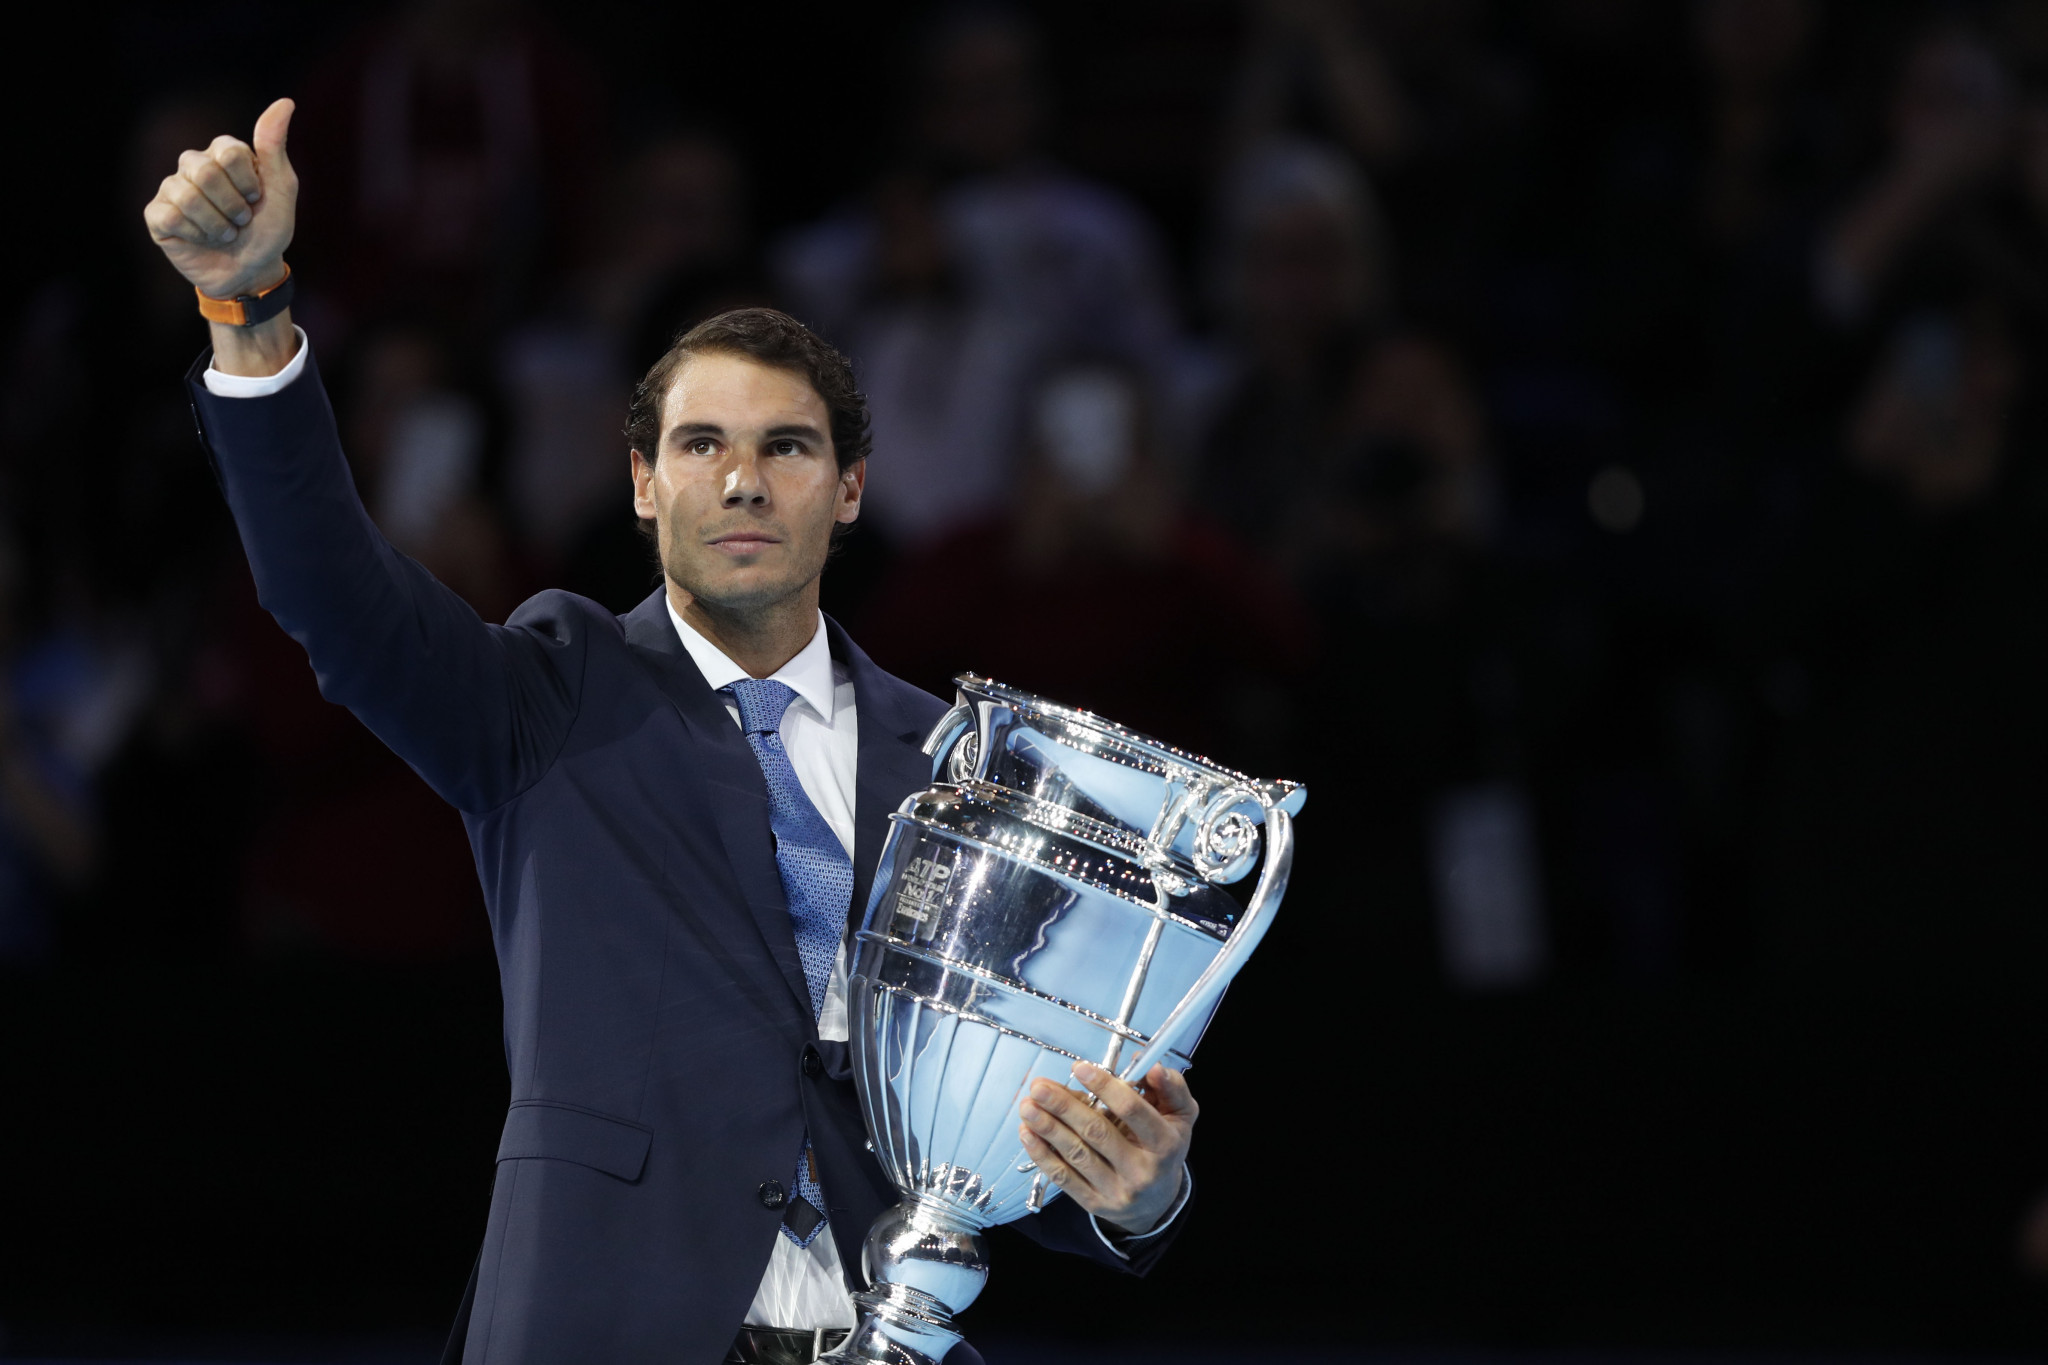 Rafael Nadal was presented with a trophy for finishing 2017 as the world number one ©Getty Images